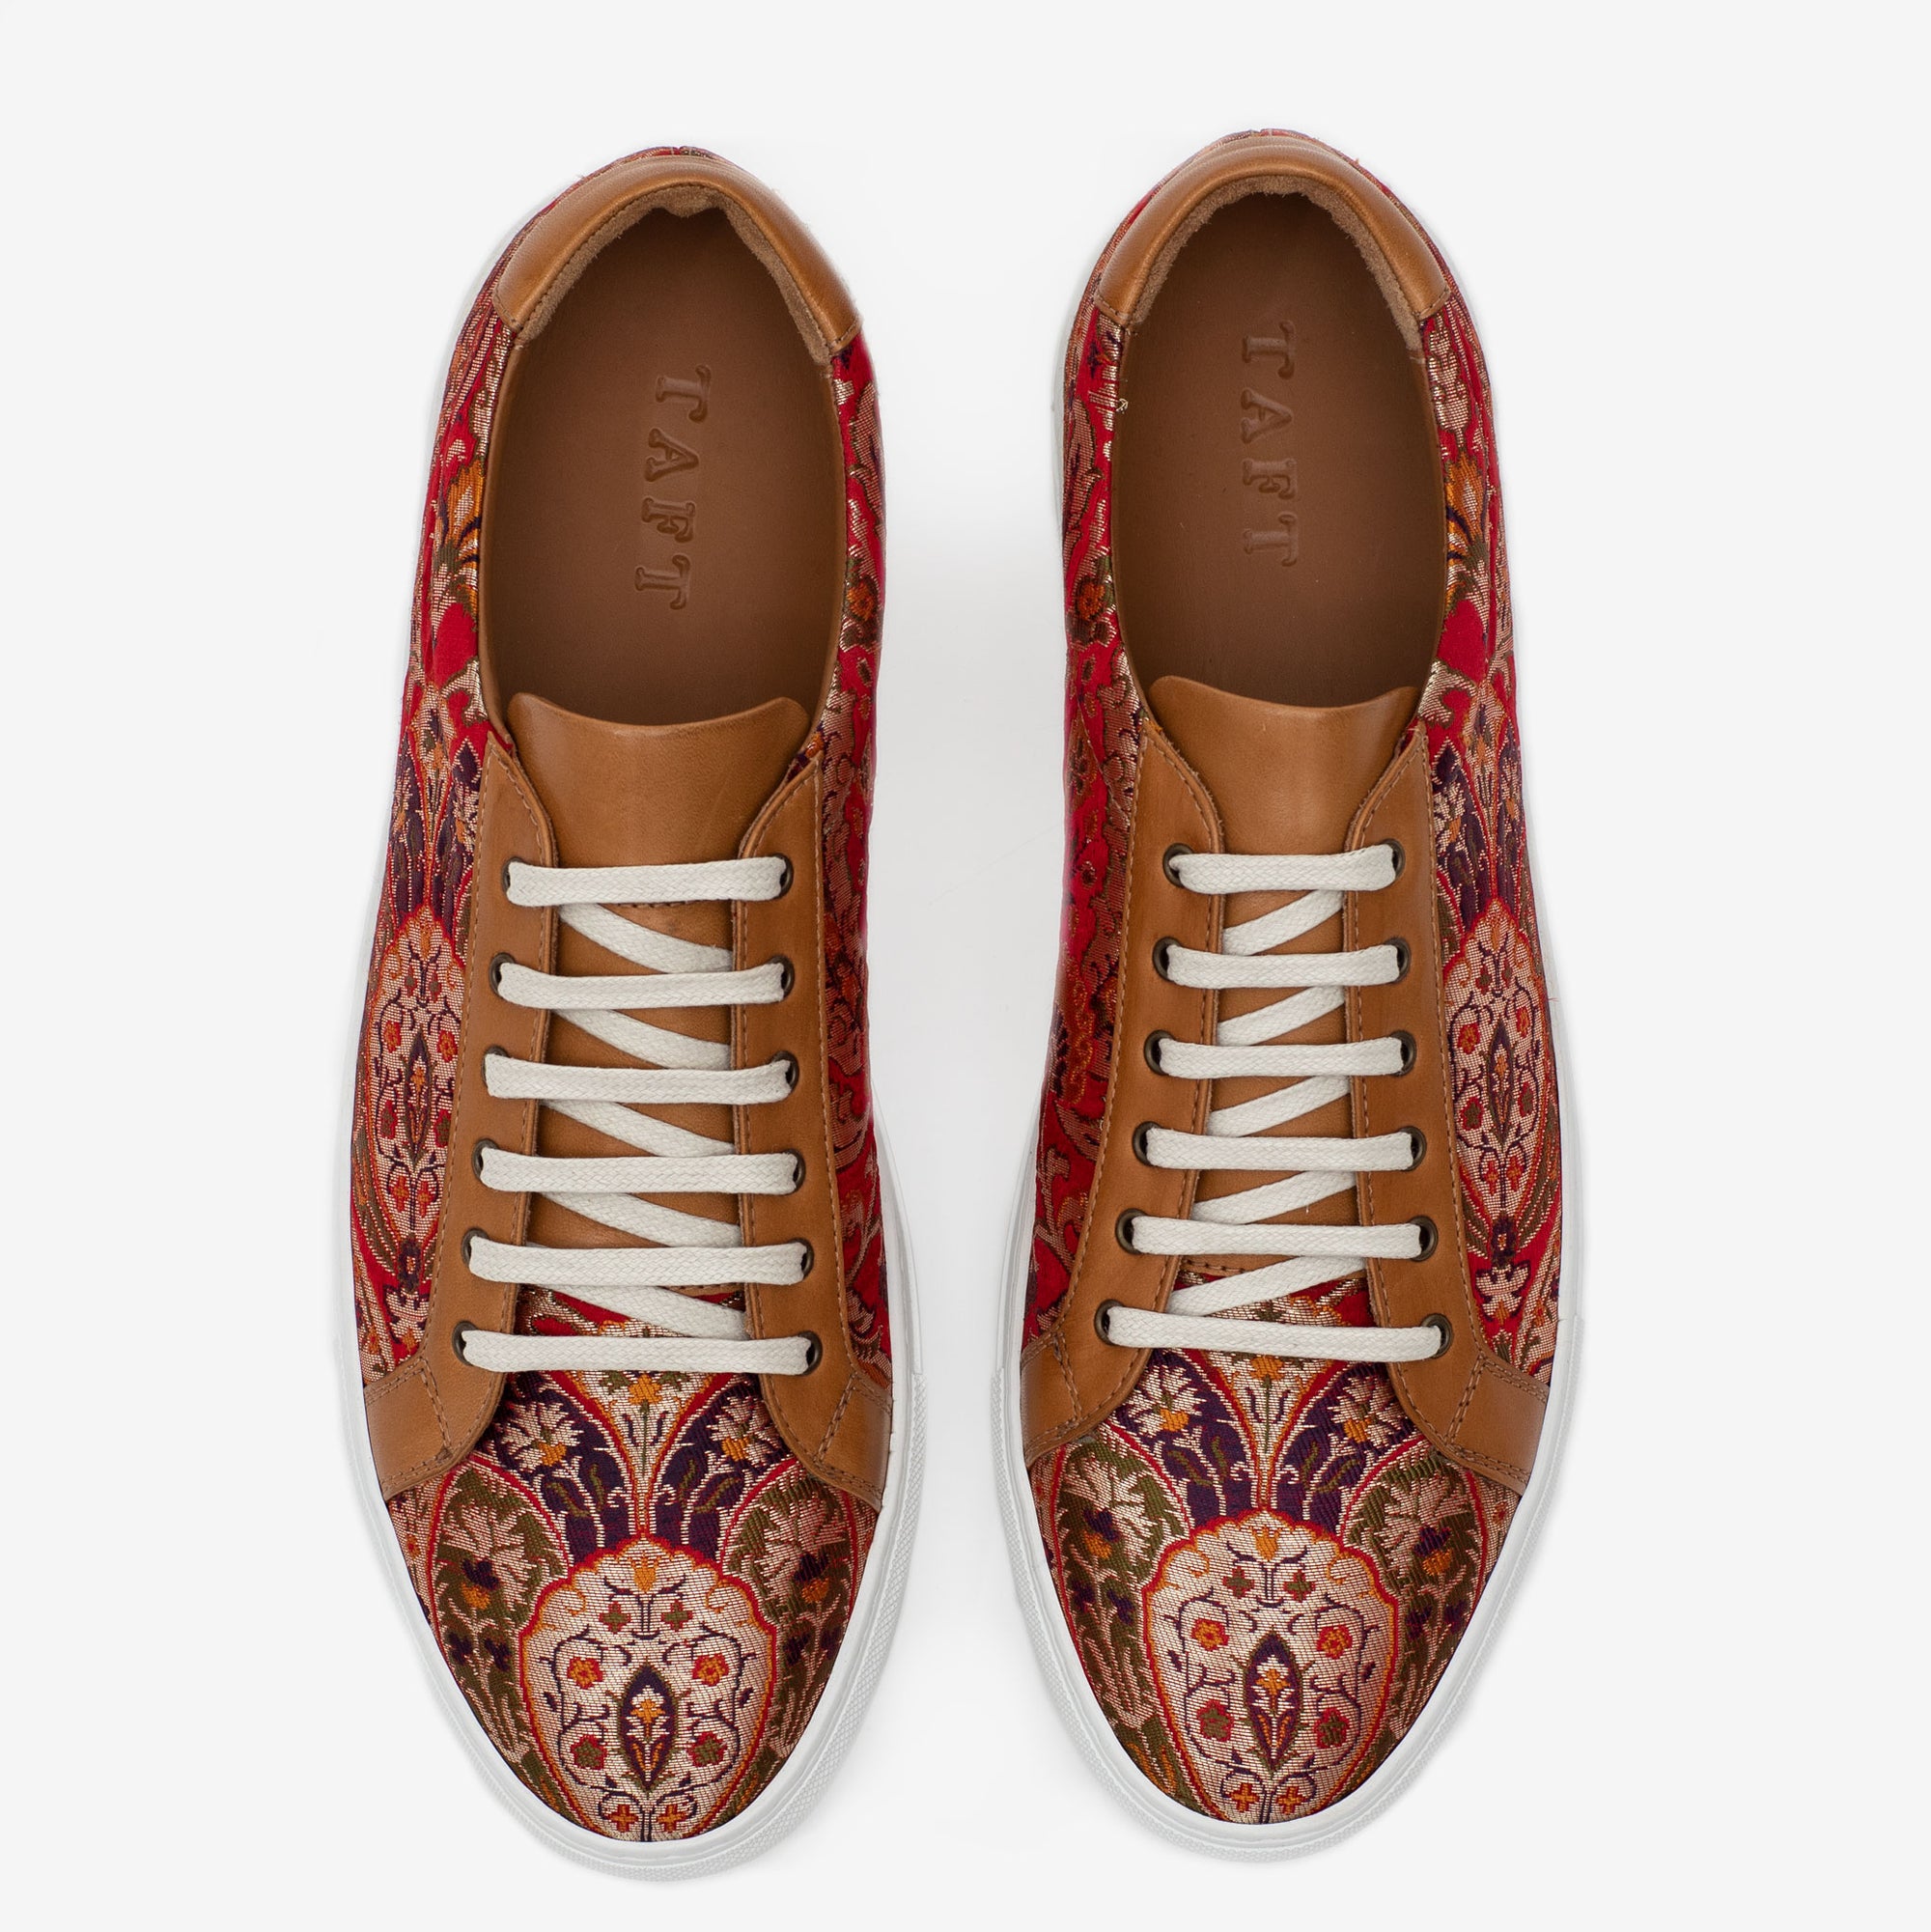 The Sneaker in Red Paisley Overhead